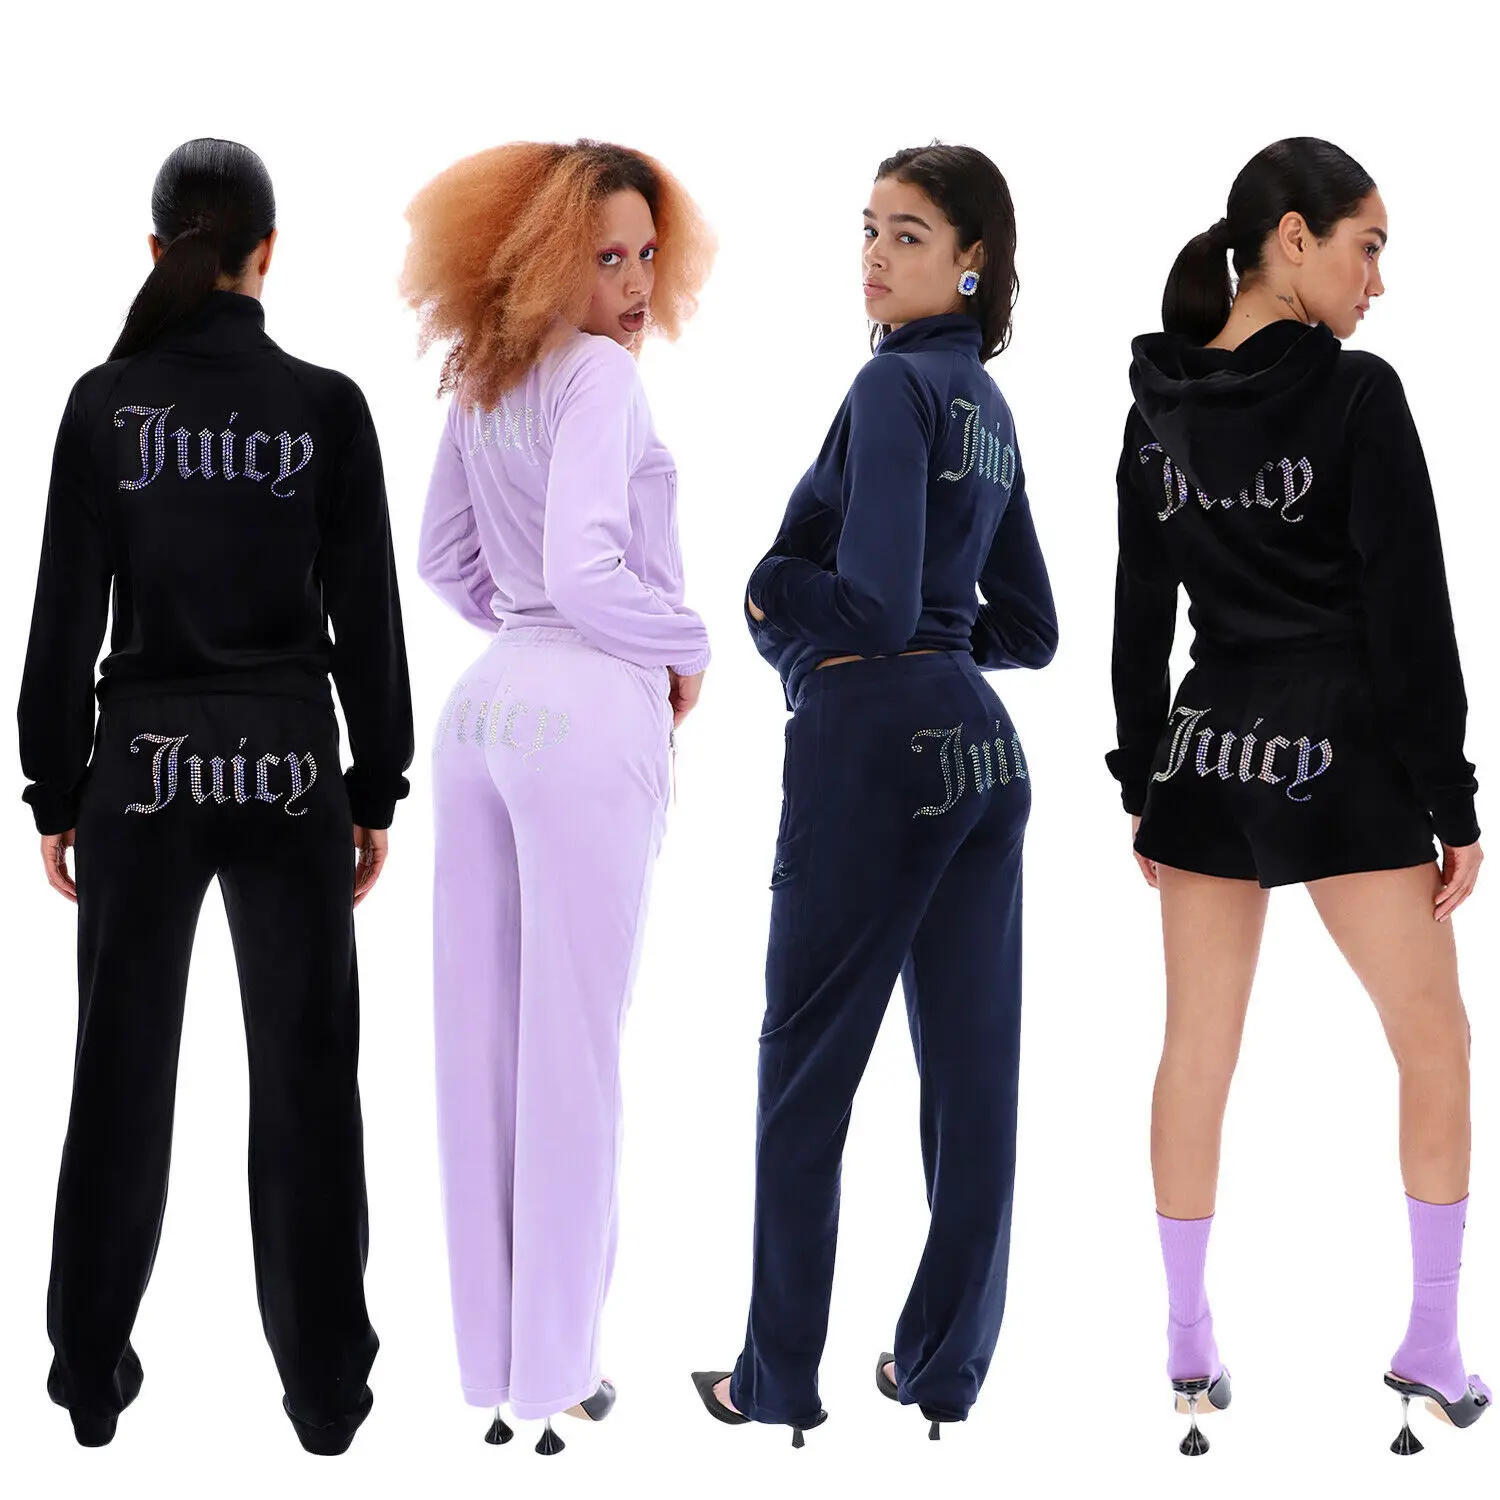 Juicy Coutoure Tracksuit for Women Clothing The Giving Movement Clothes Hot Selling Casual Gold Velvet Suit Women's Sportswear